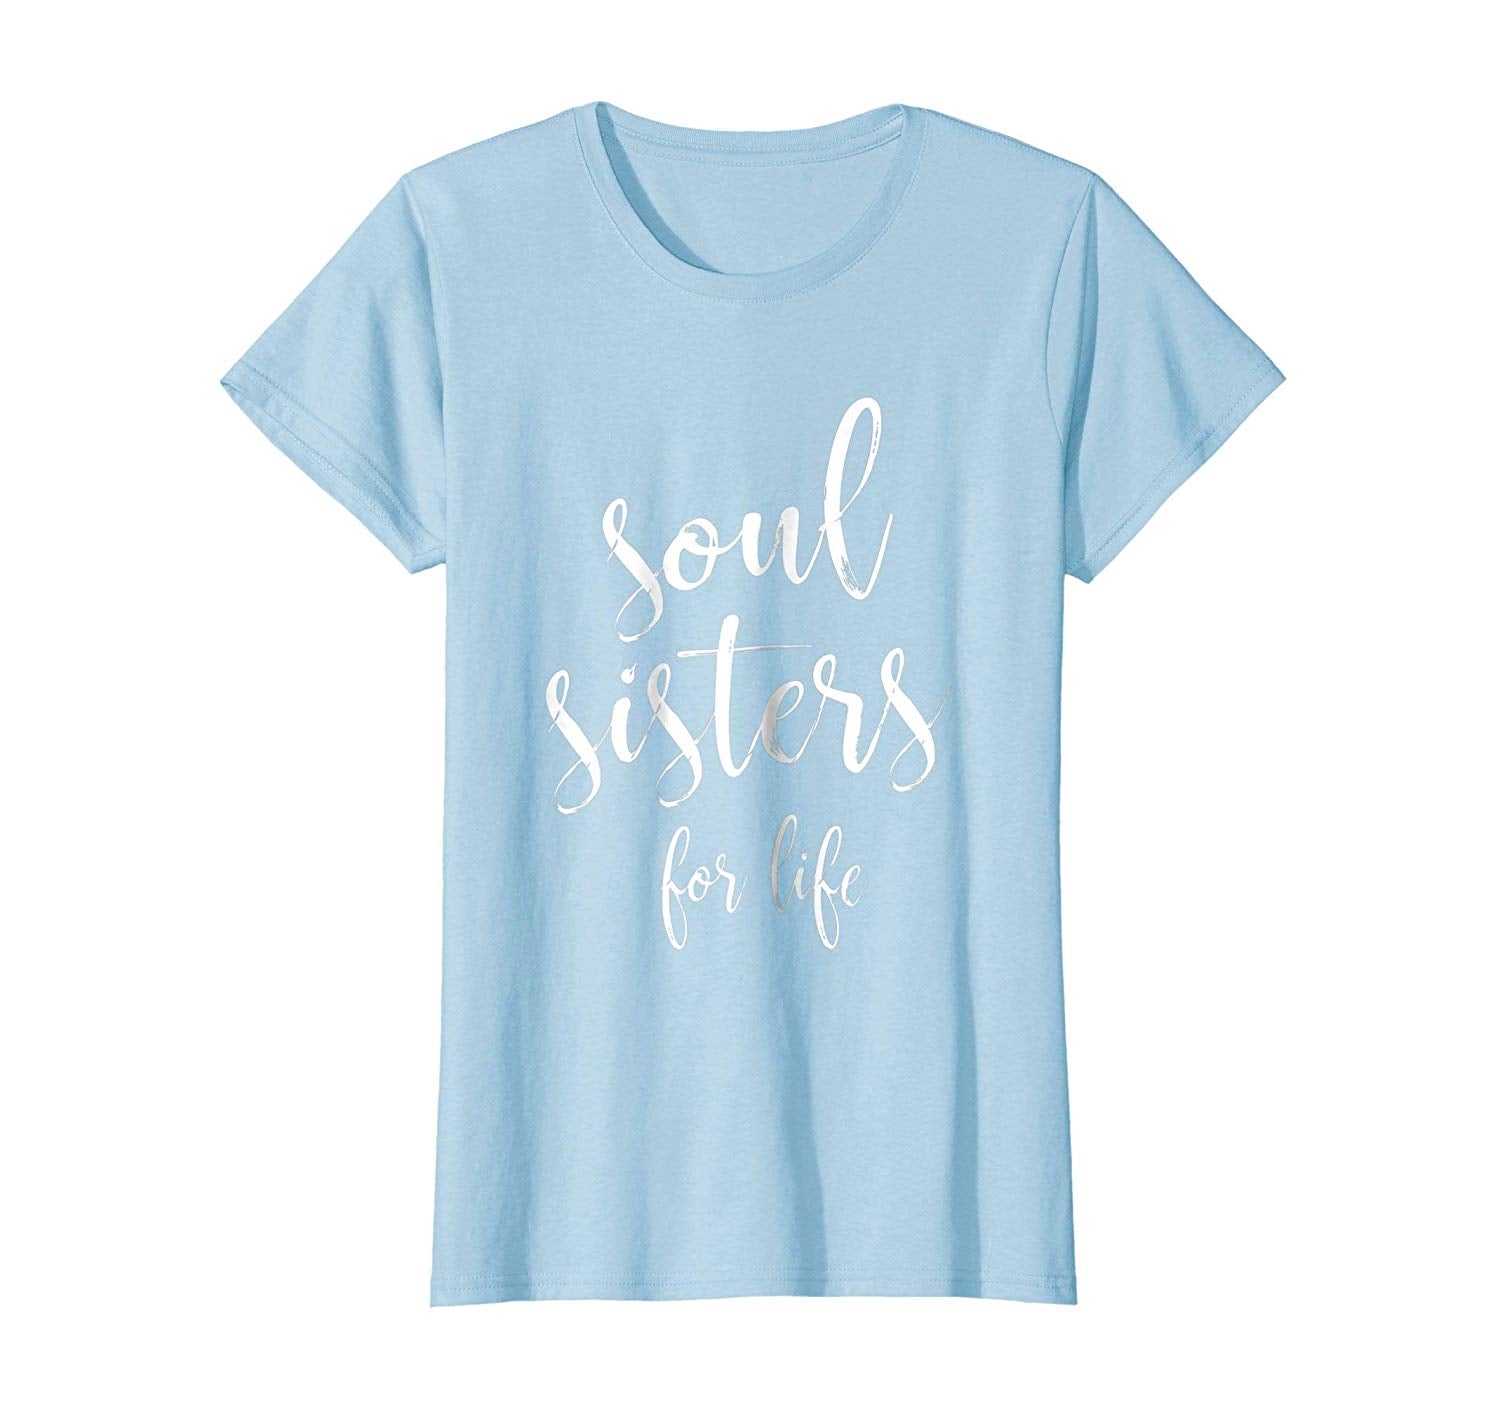 Soul Sisters Lovely Friendship and Bridal Shower Tee Shirts